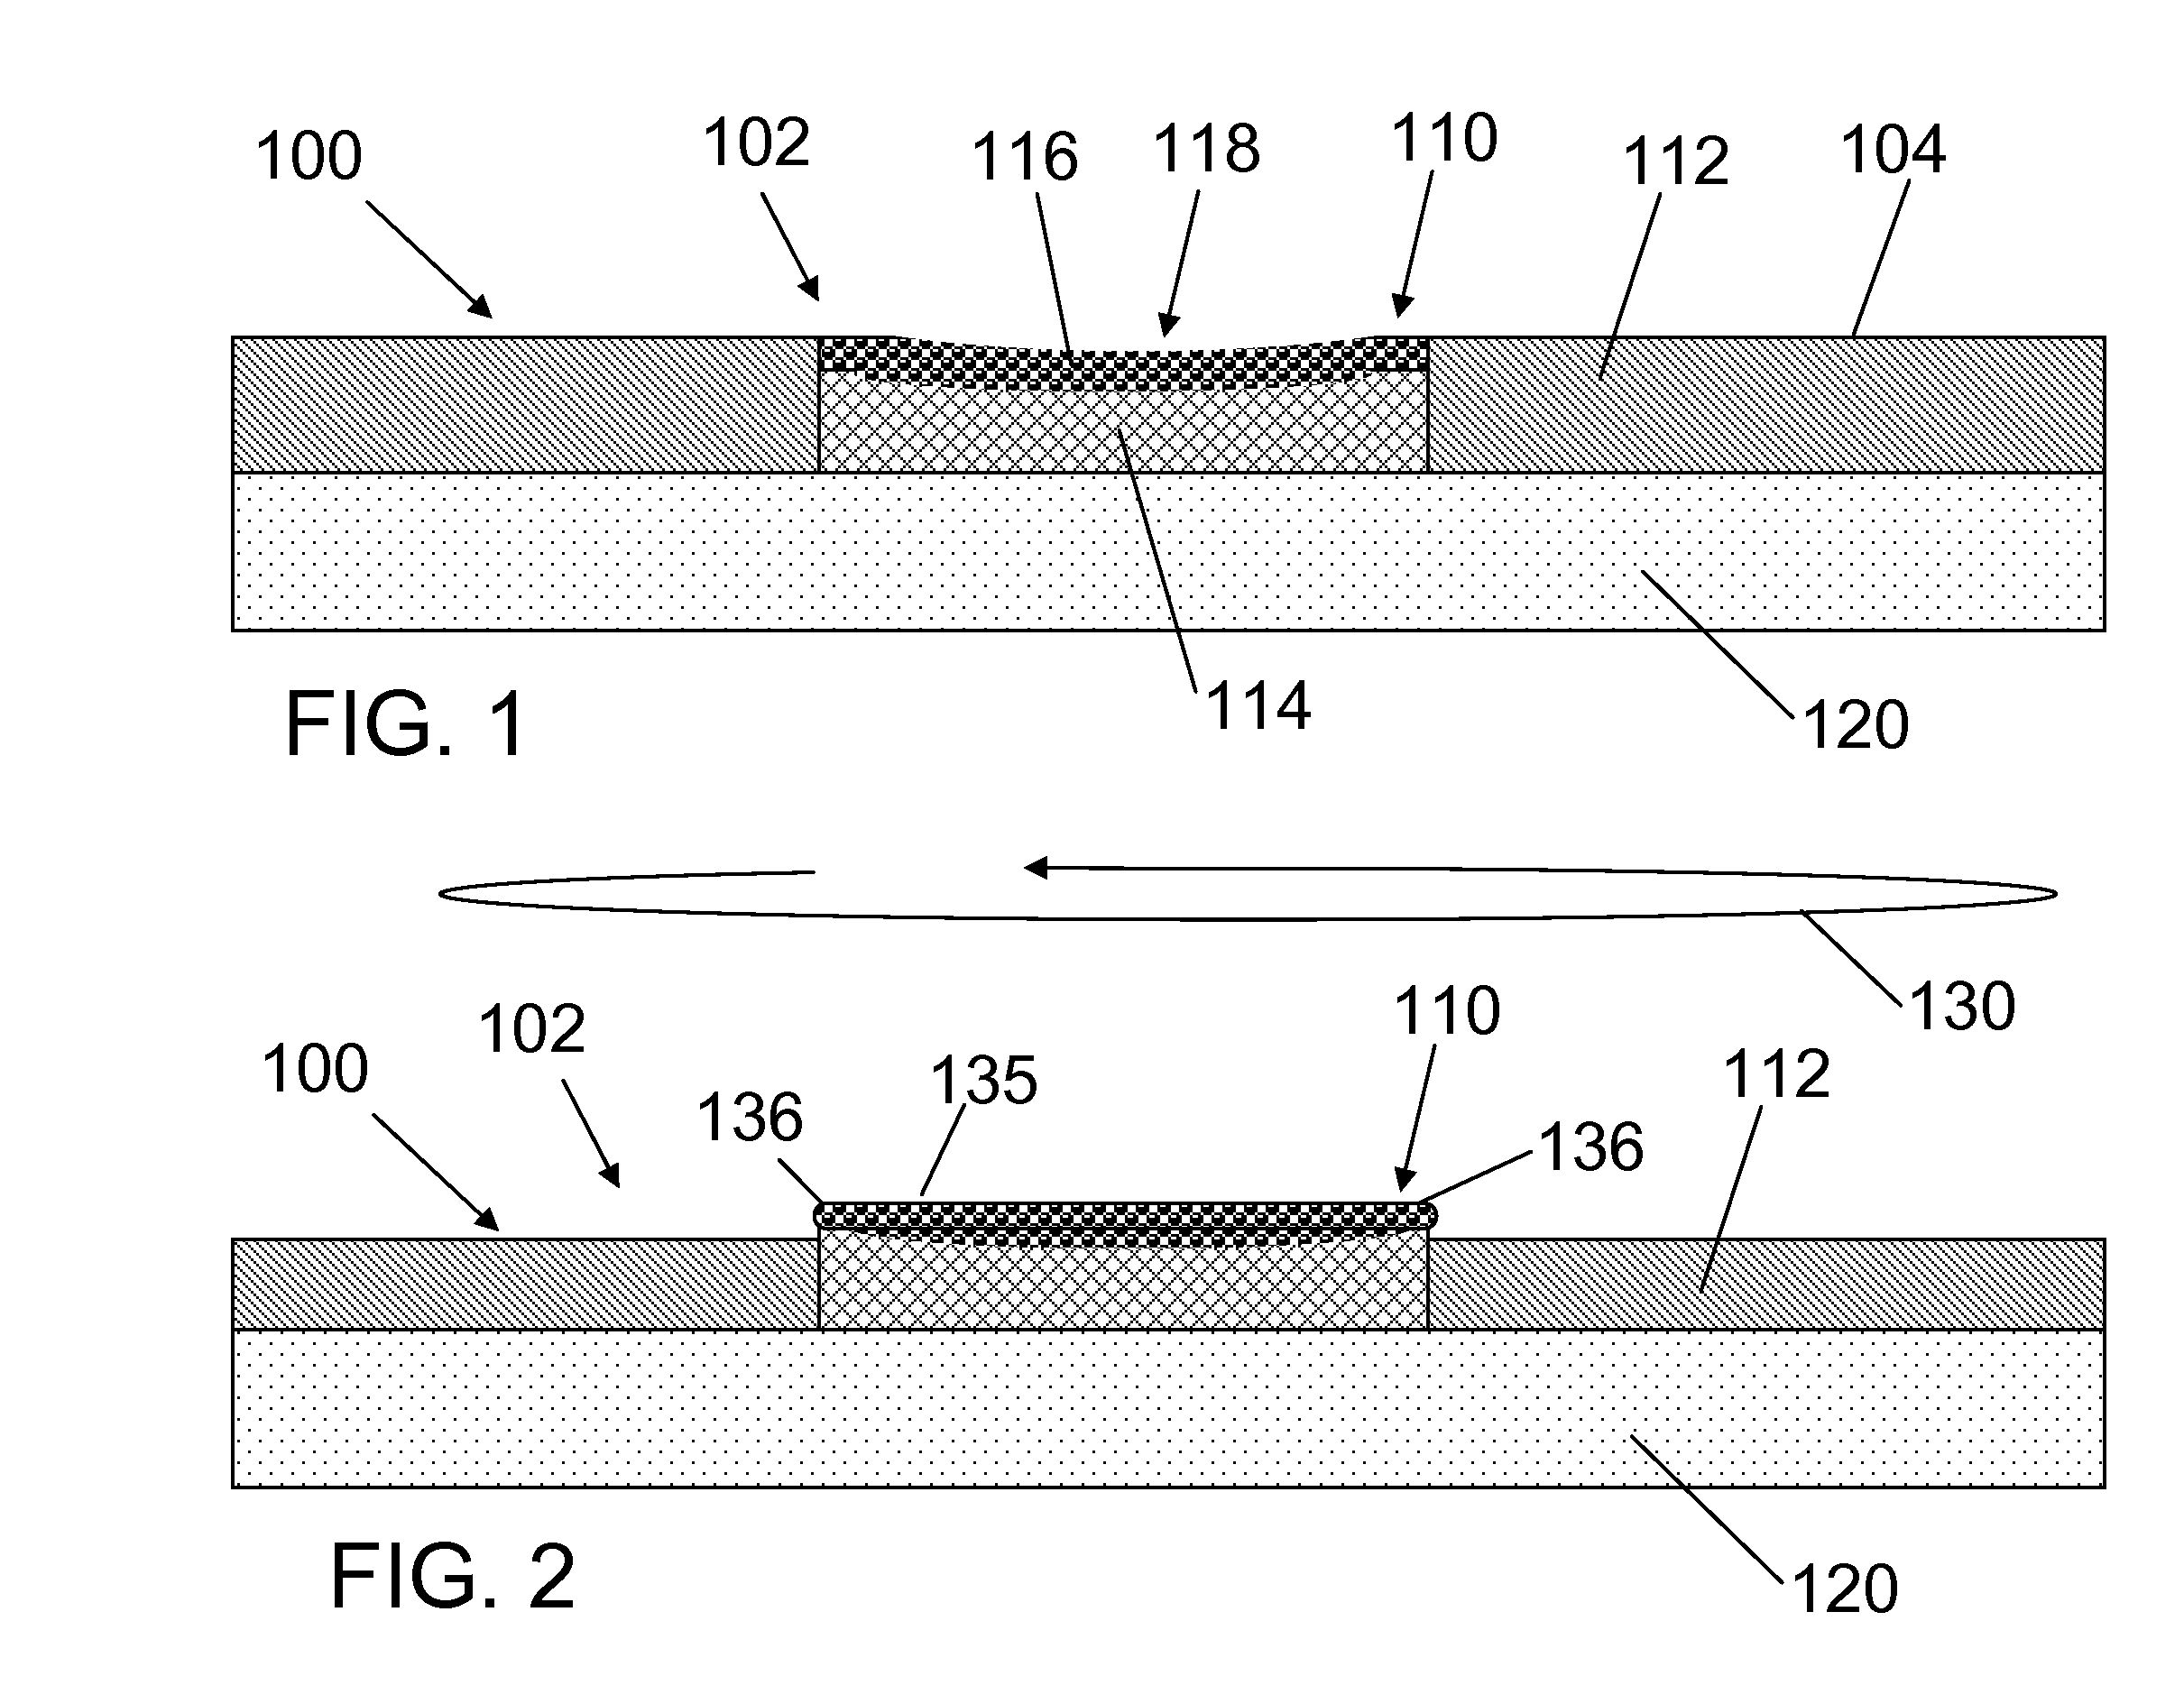 Bonding of substrates including metal-dielectric patterns with metal raised above dielectric